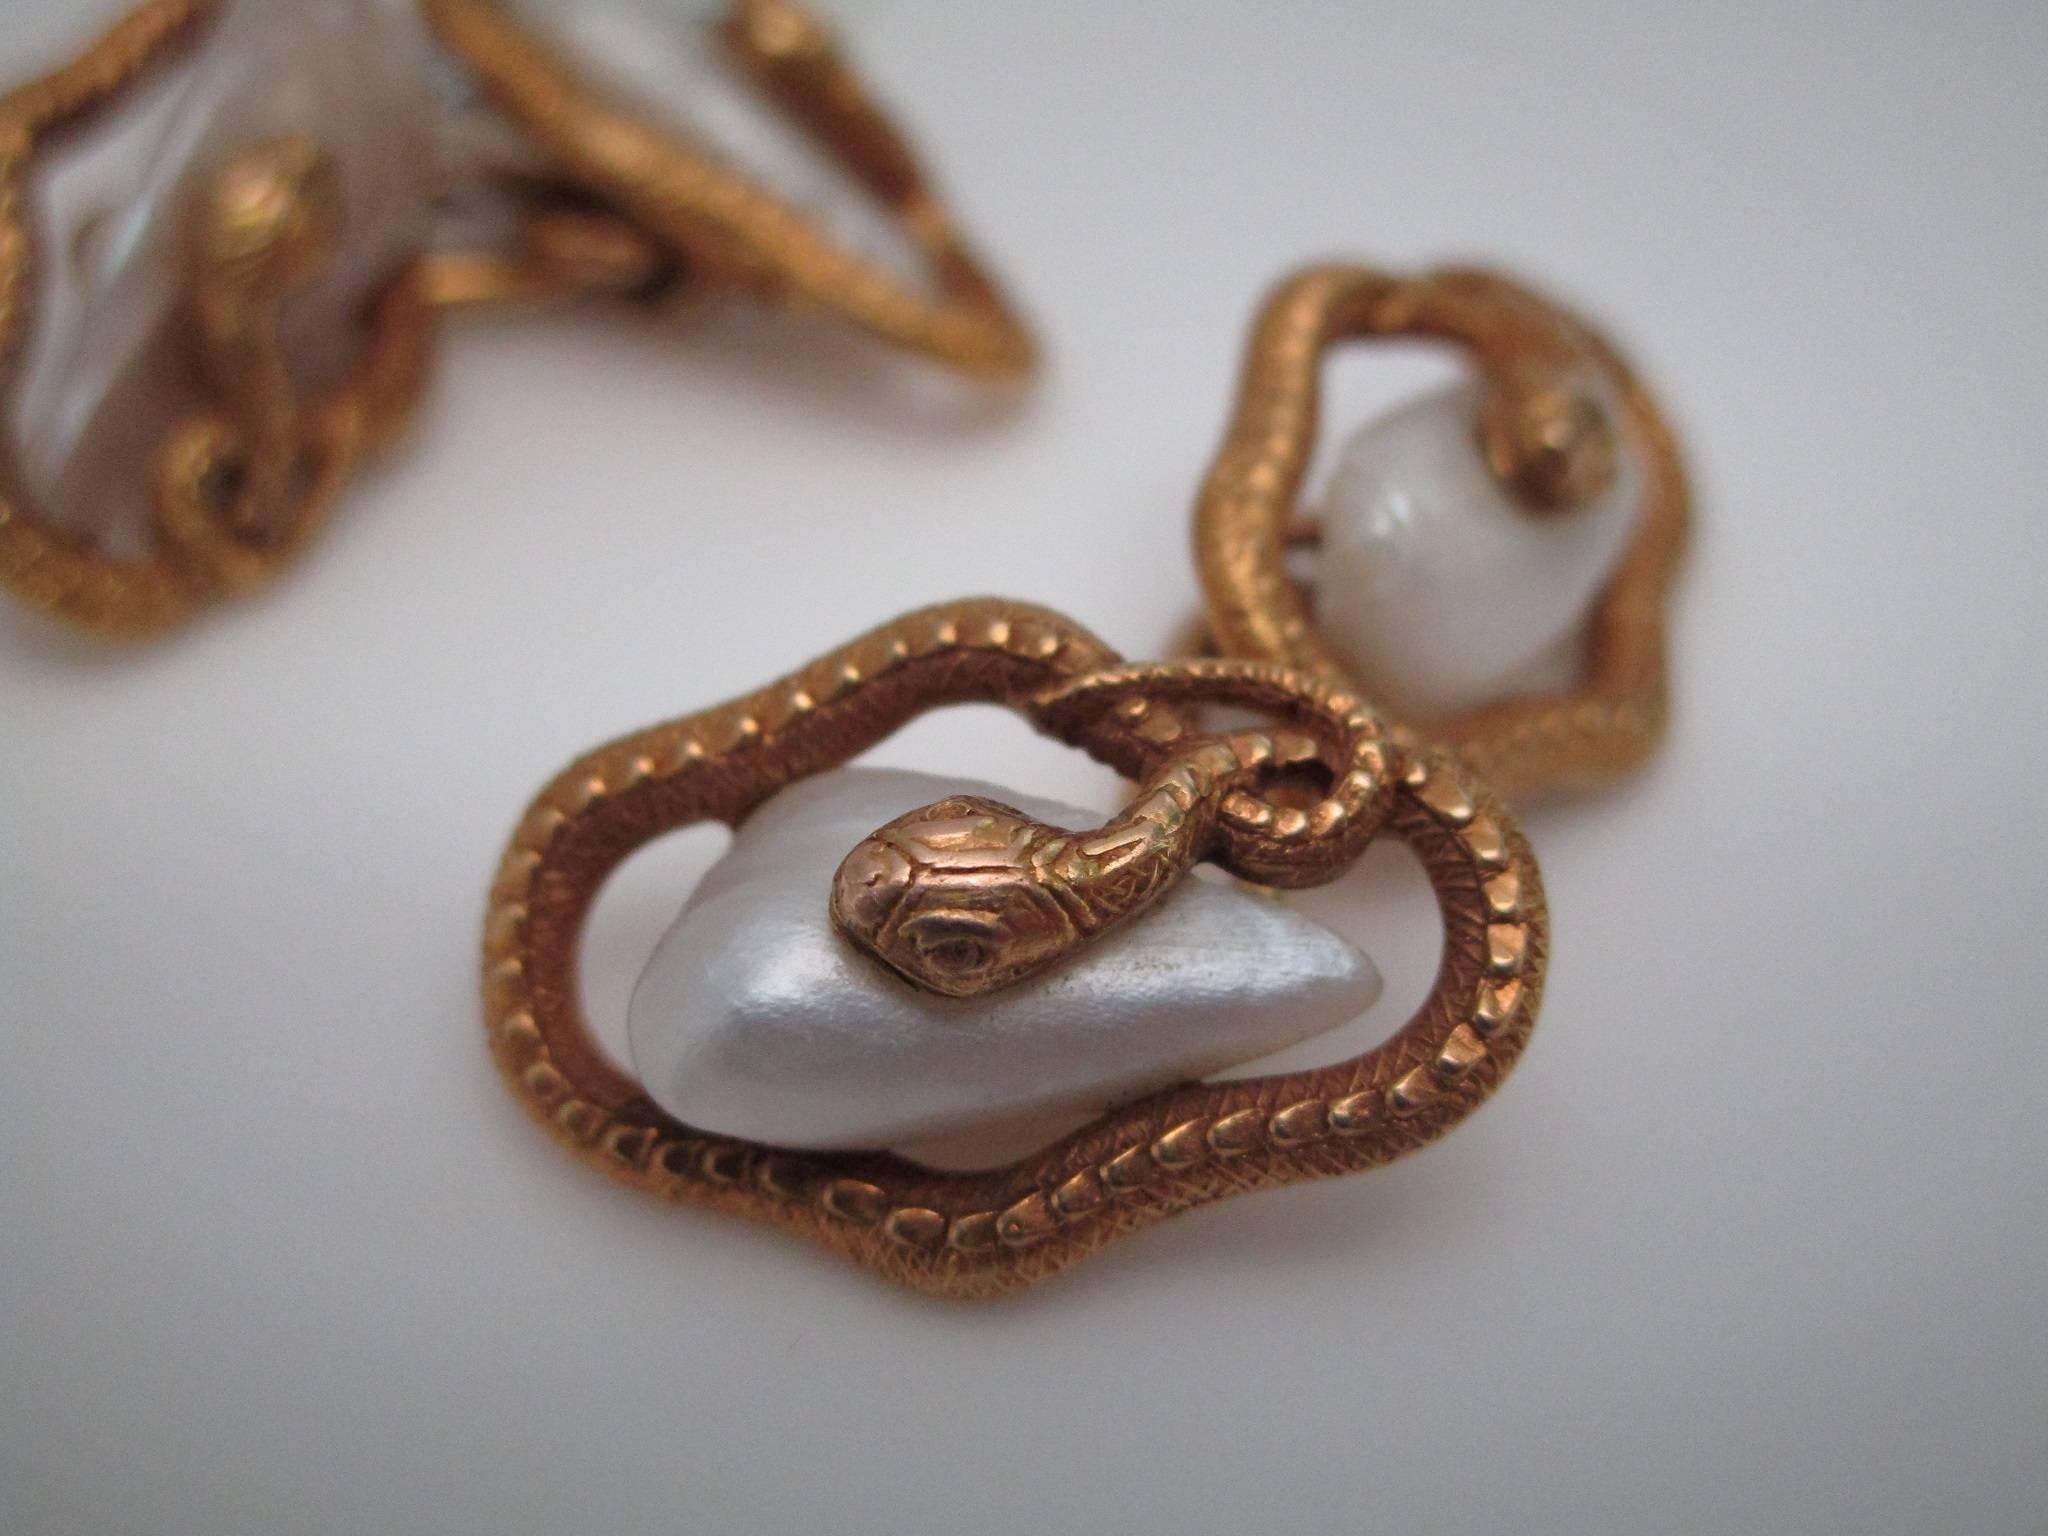 Late Victorian 14 Karat Gold Cufflinks with Victorian Snake Motif and Mississippi Delta Pearl